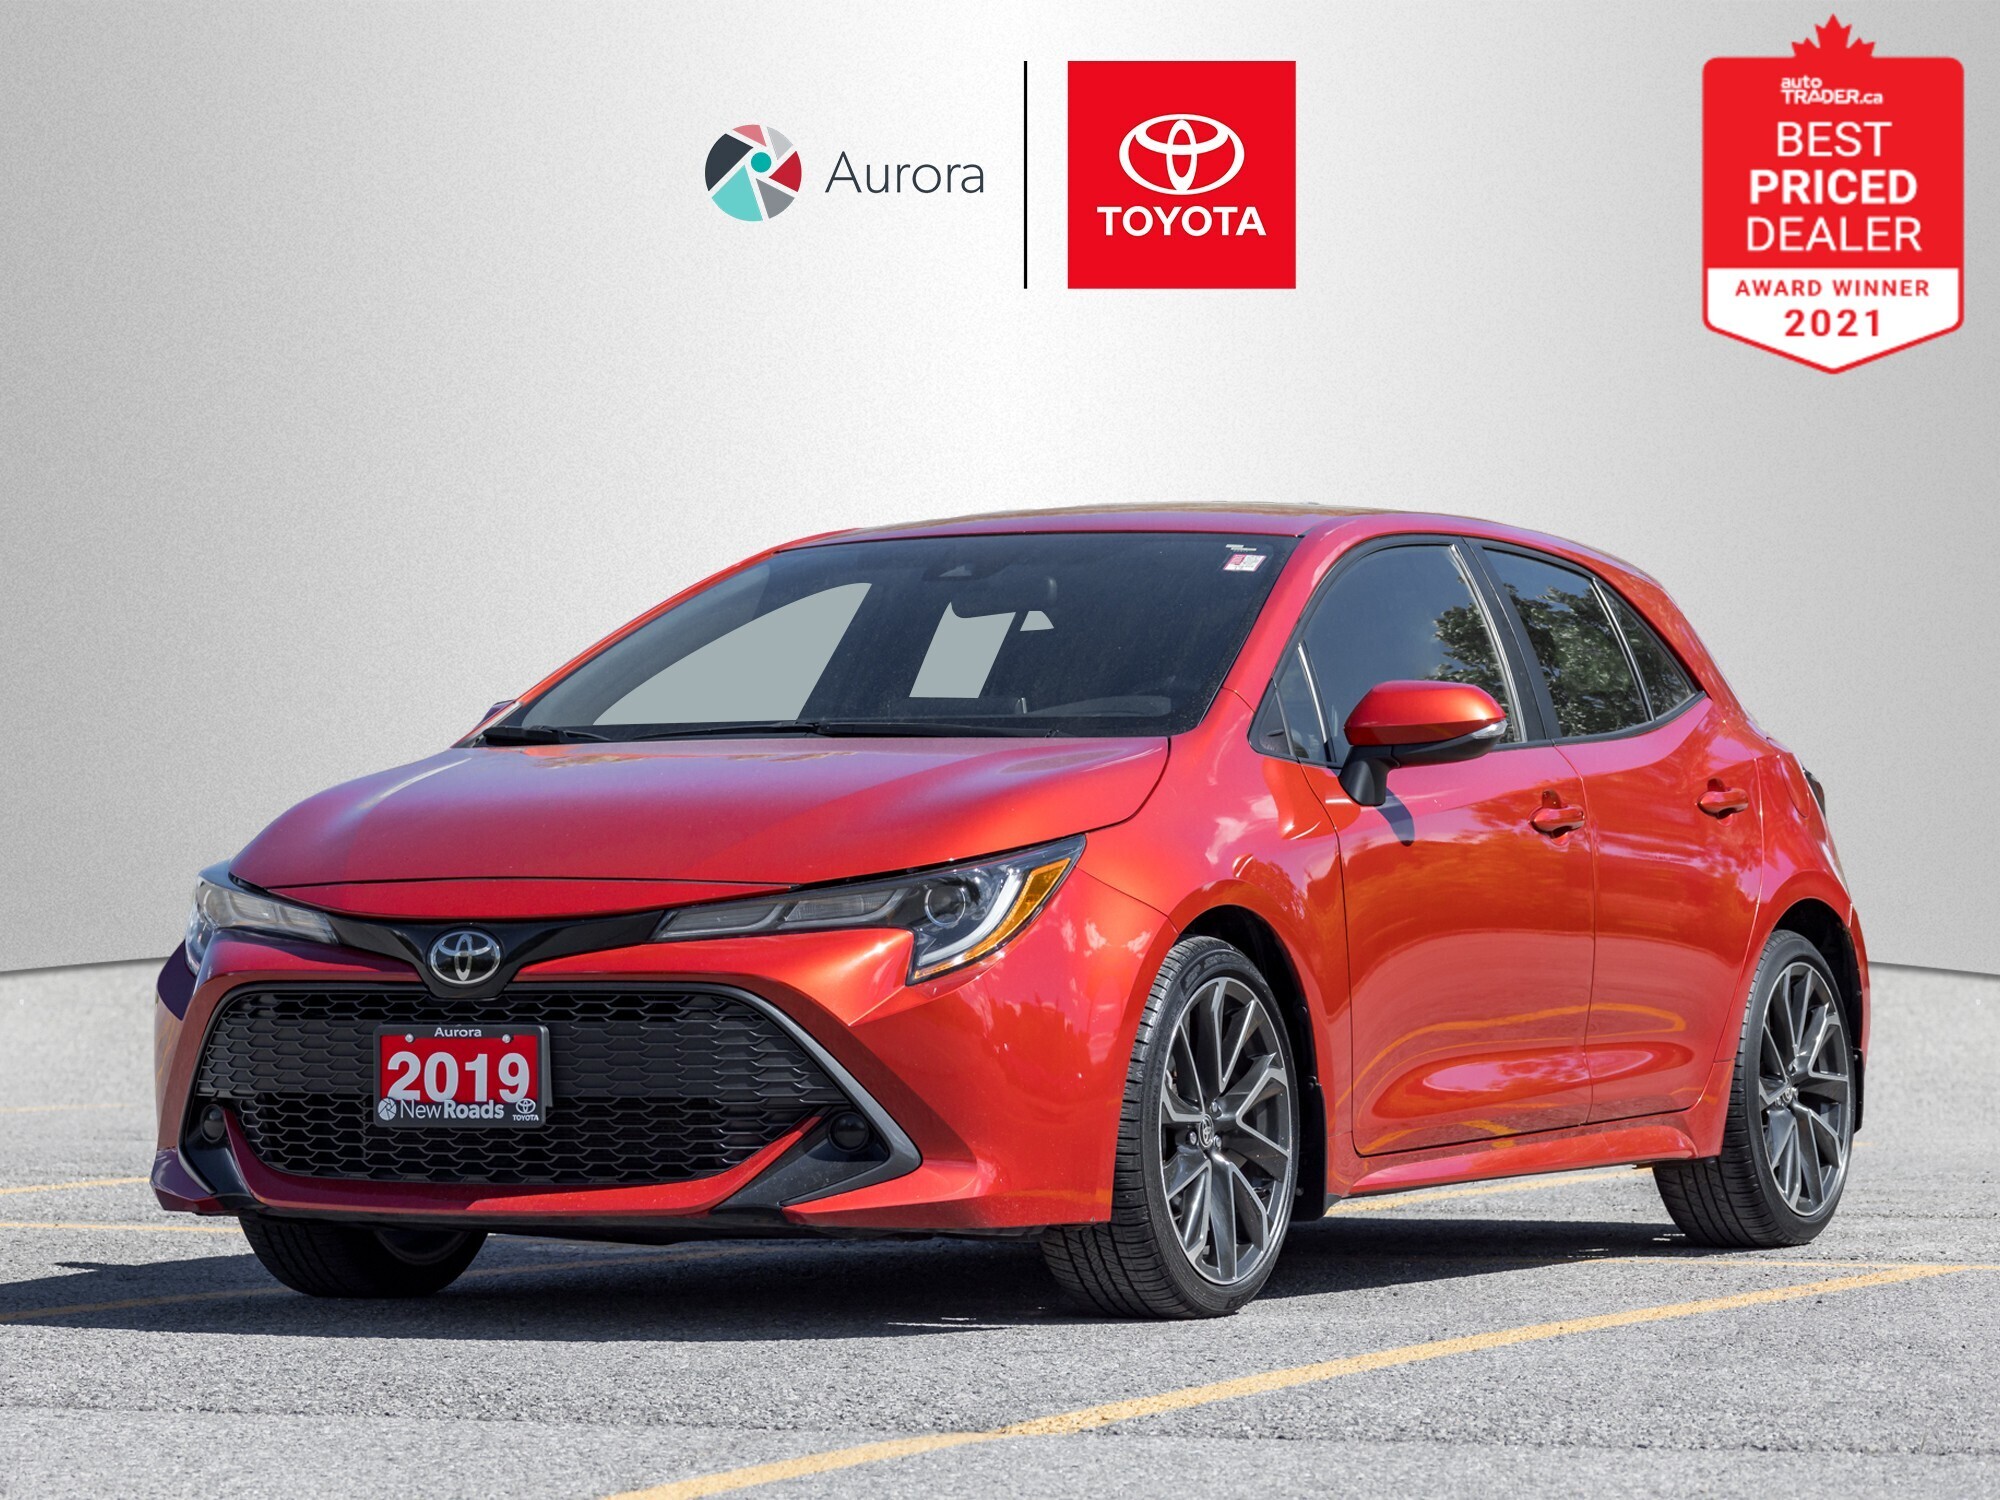 2019 Toyota Corolla Hatchback SE, Accident free, 1 Owner, Dealership Maintained